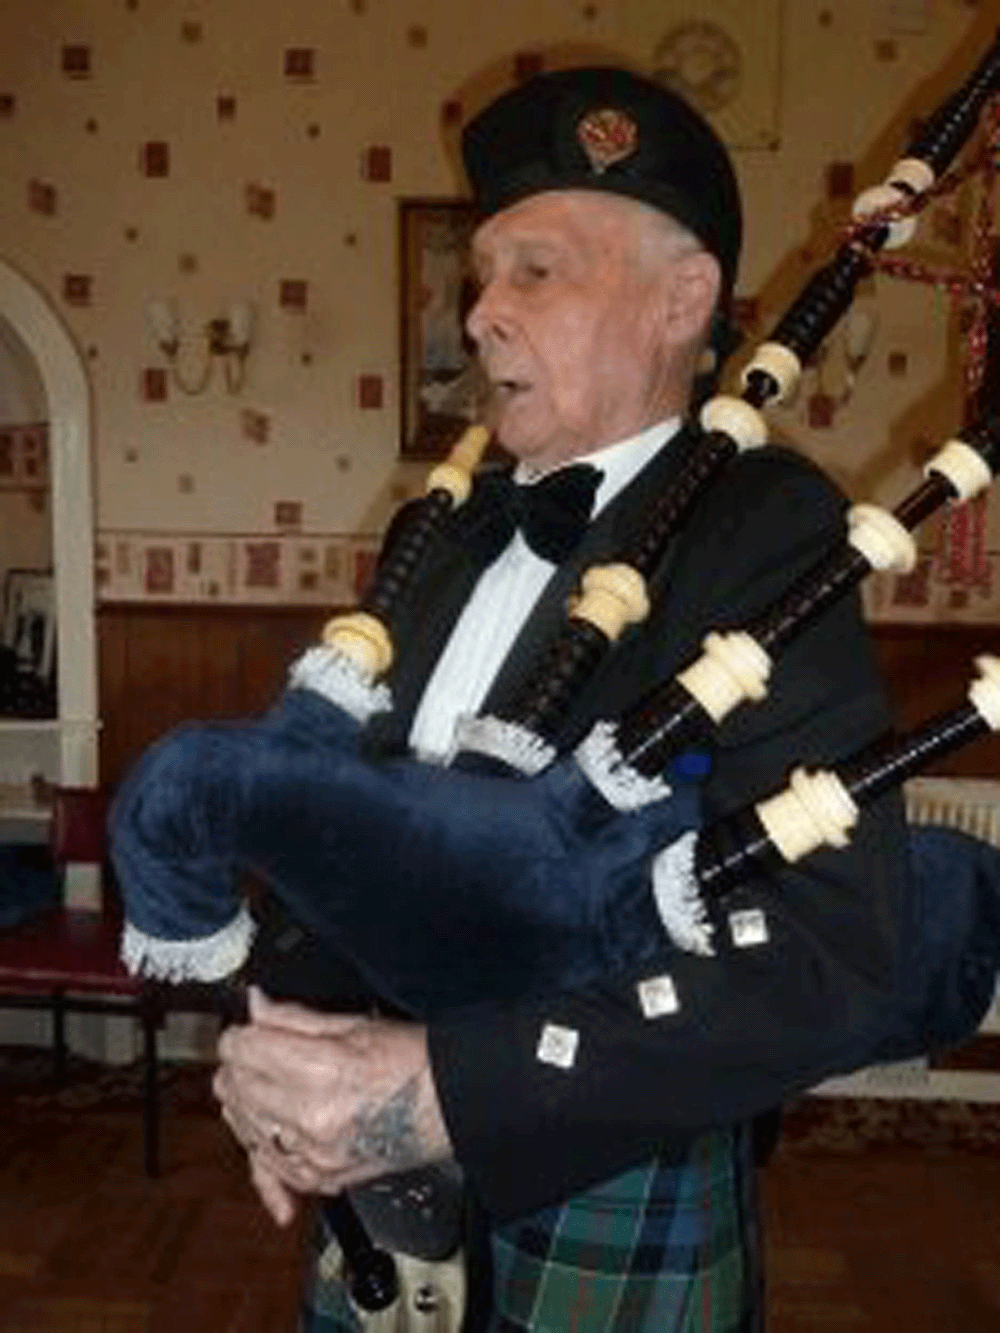 David playing his bagpipes recently